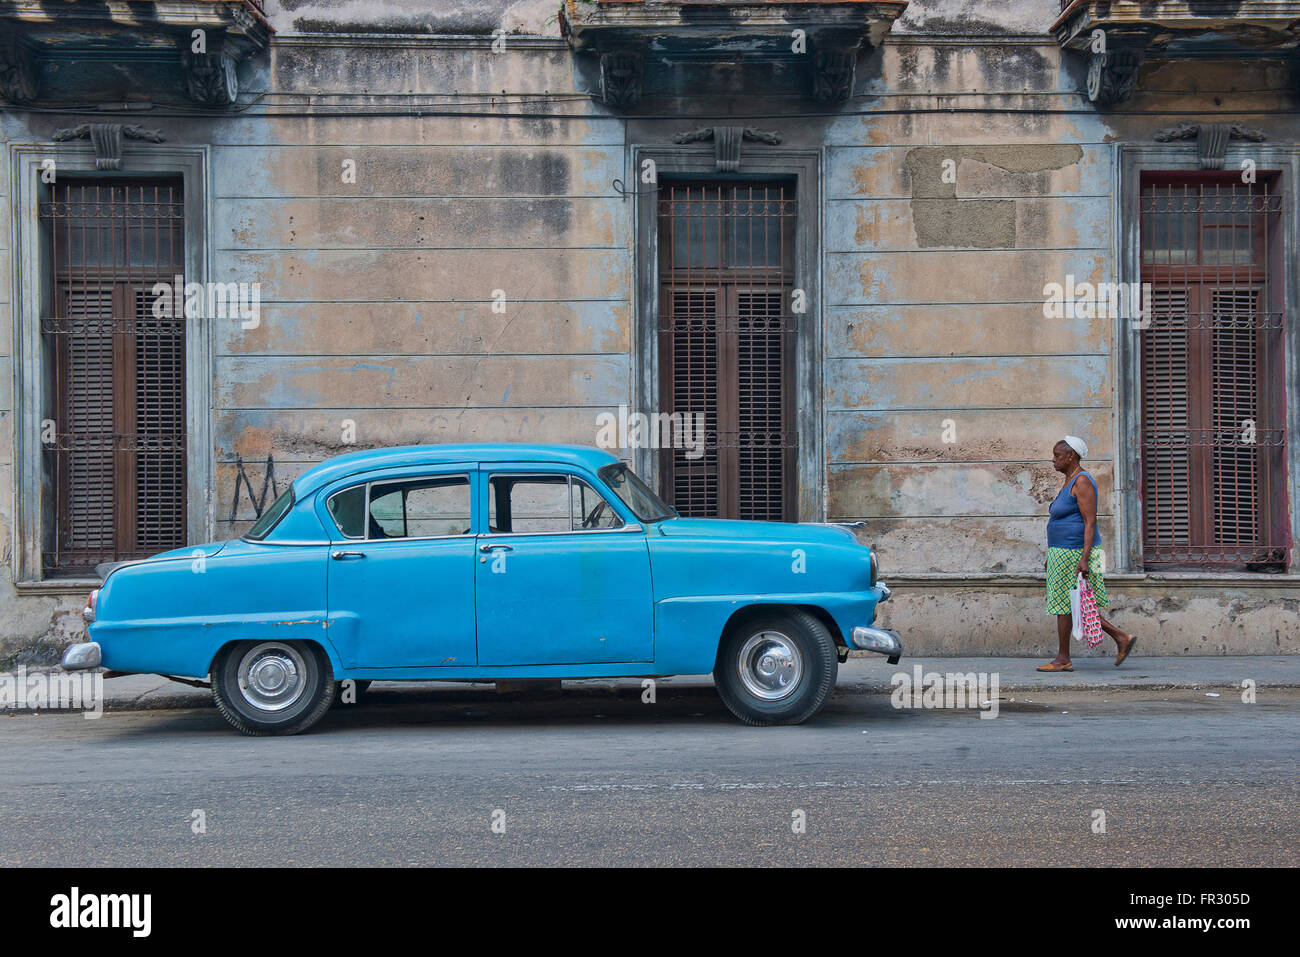 A vintage blue car parked on the streets of Old Havana, Cuba. Stock Photo